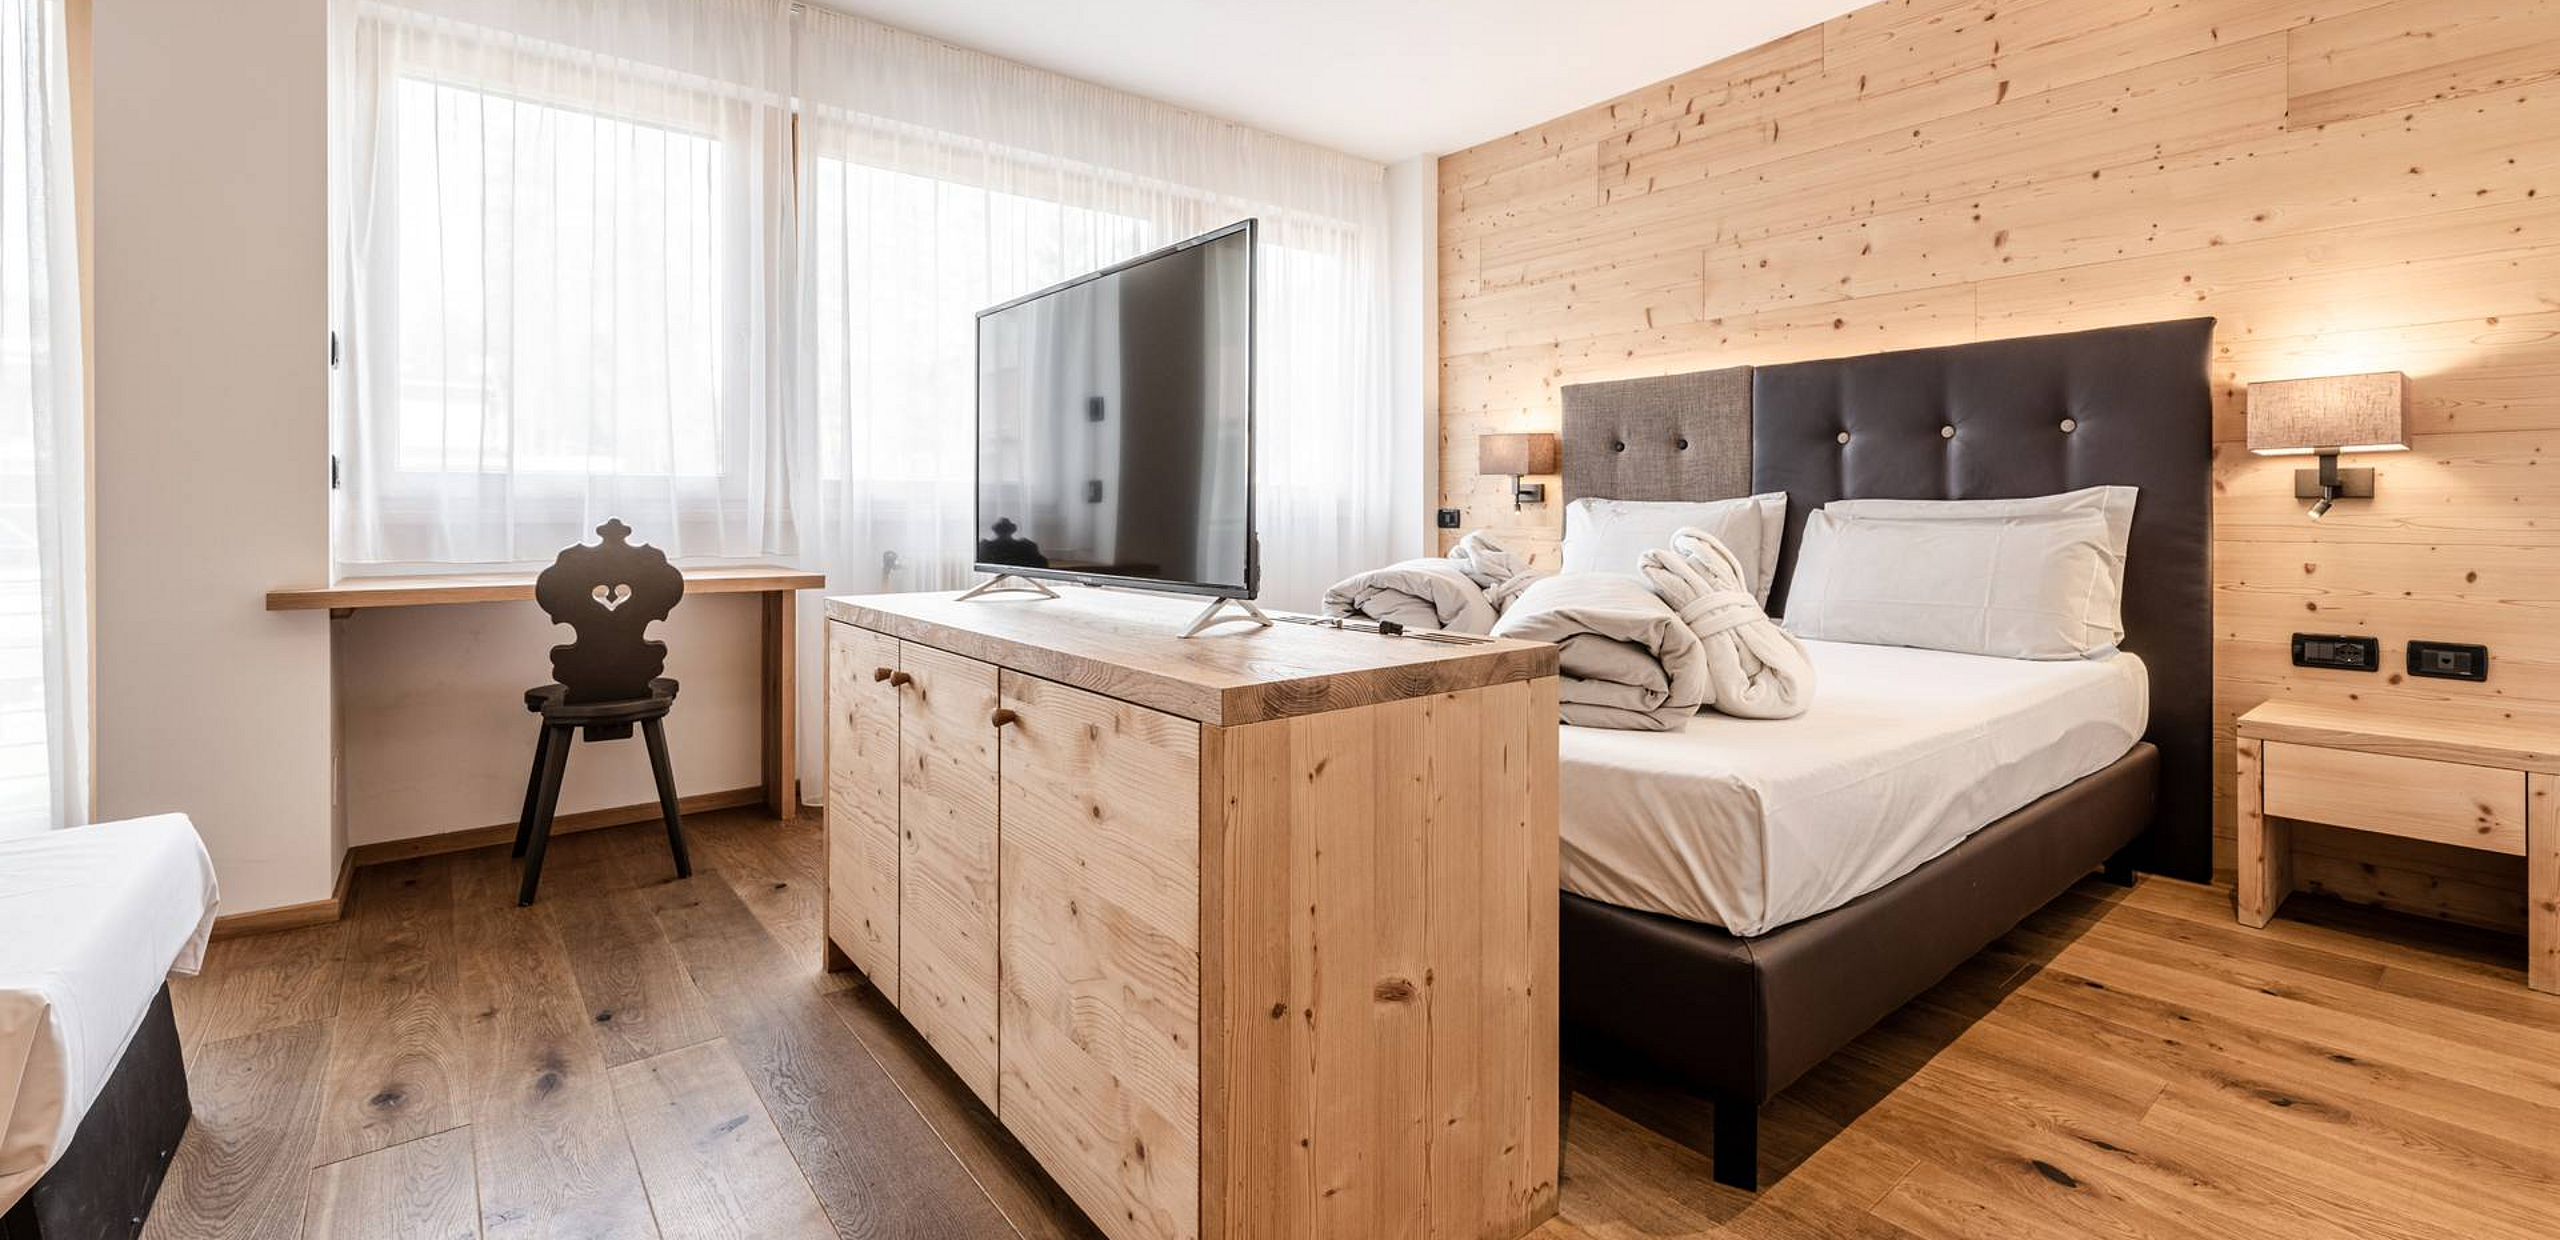 Suites with balcony at the activity hotel, South Tyrol